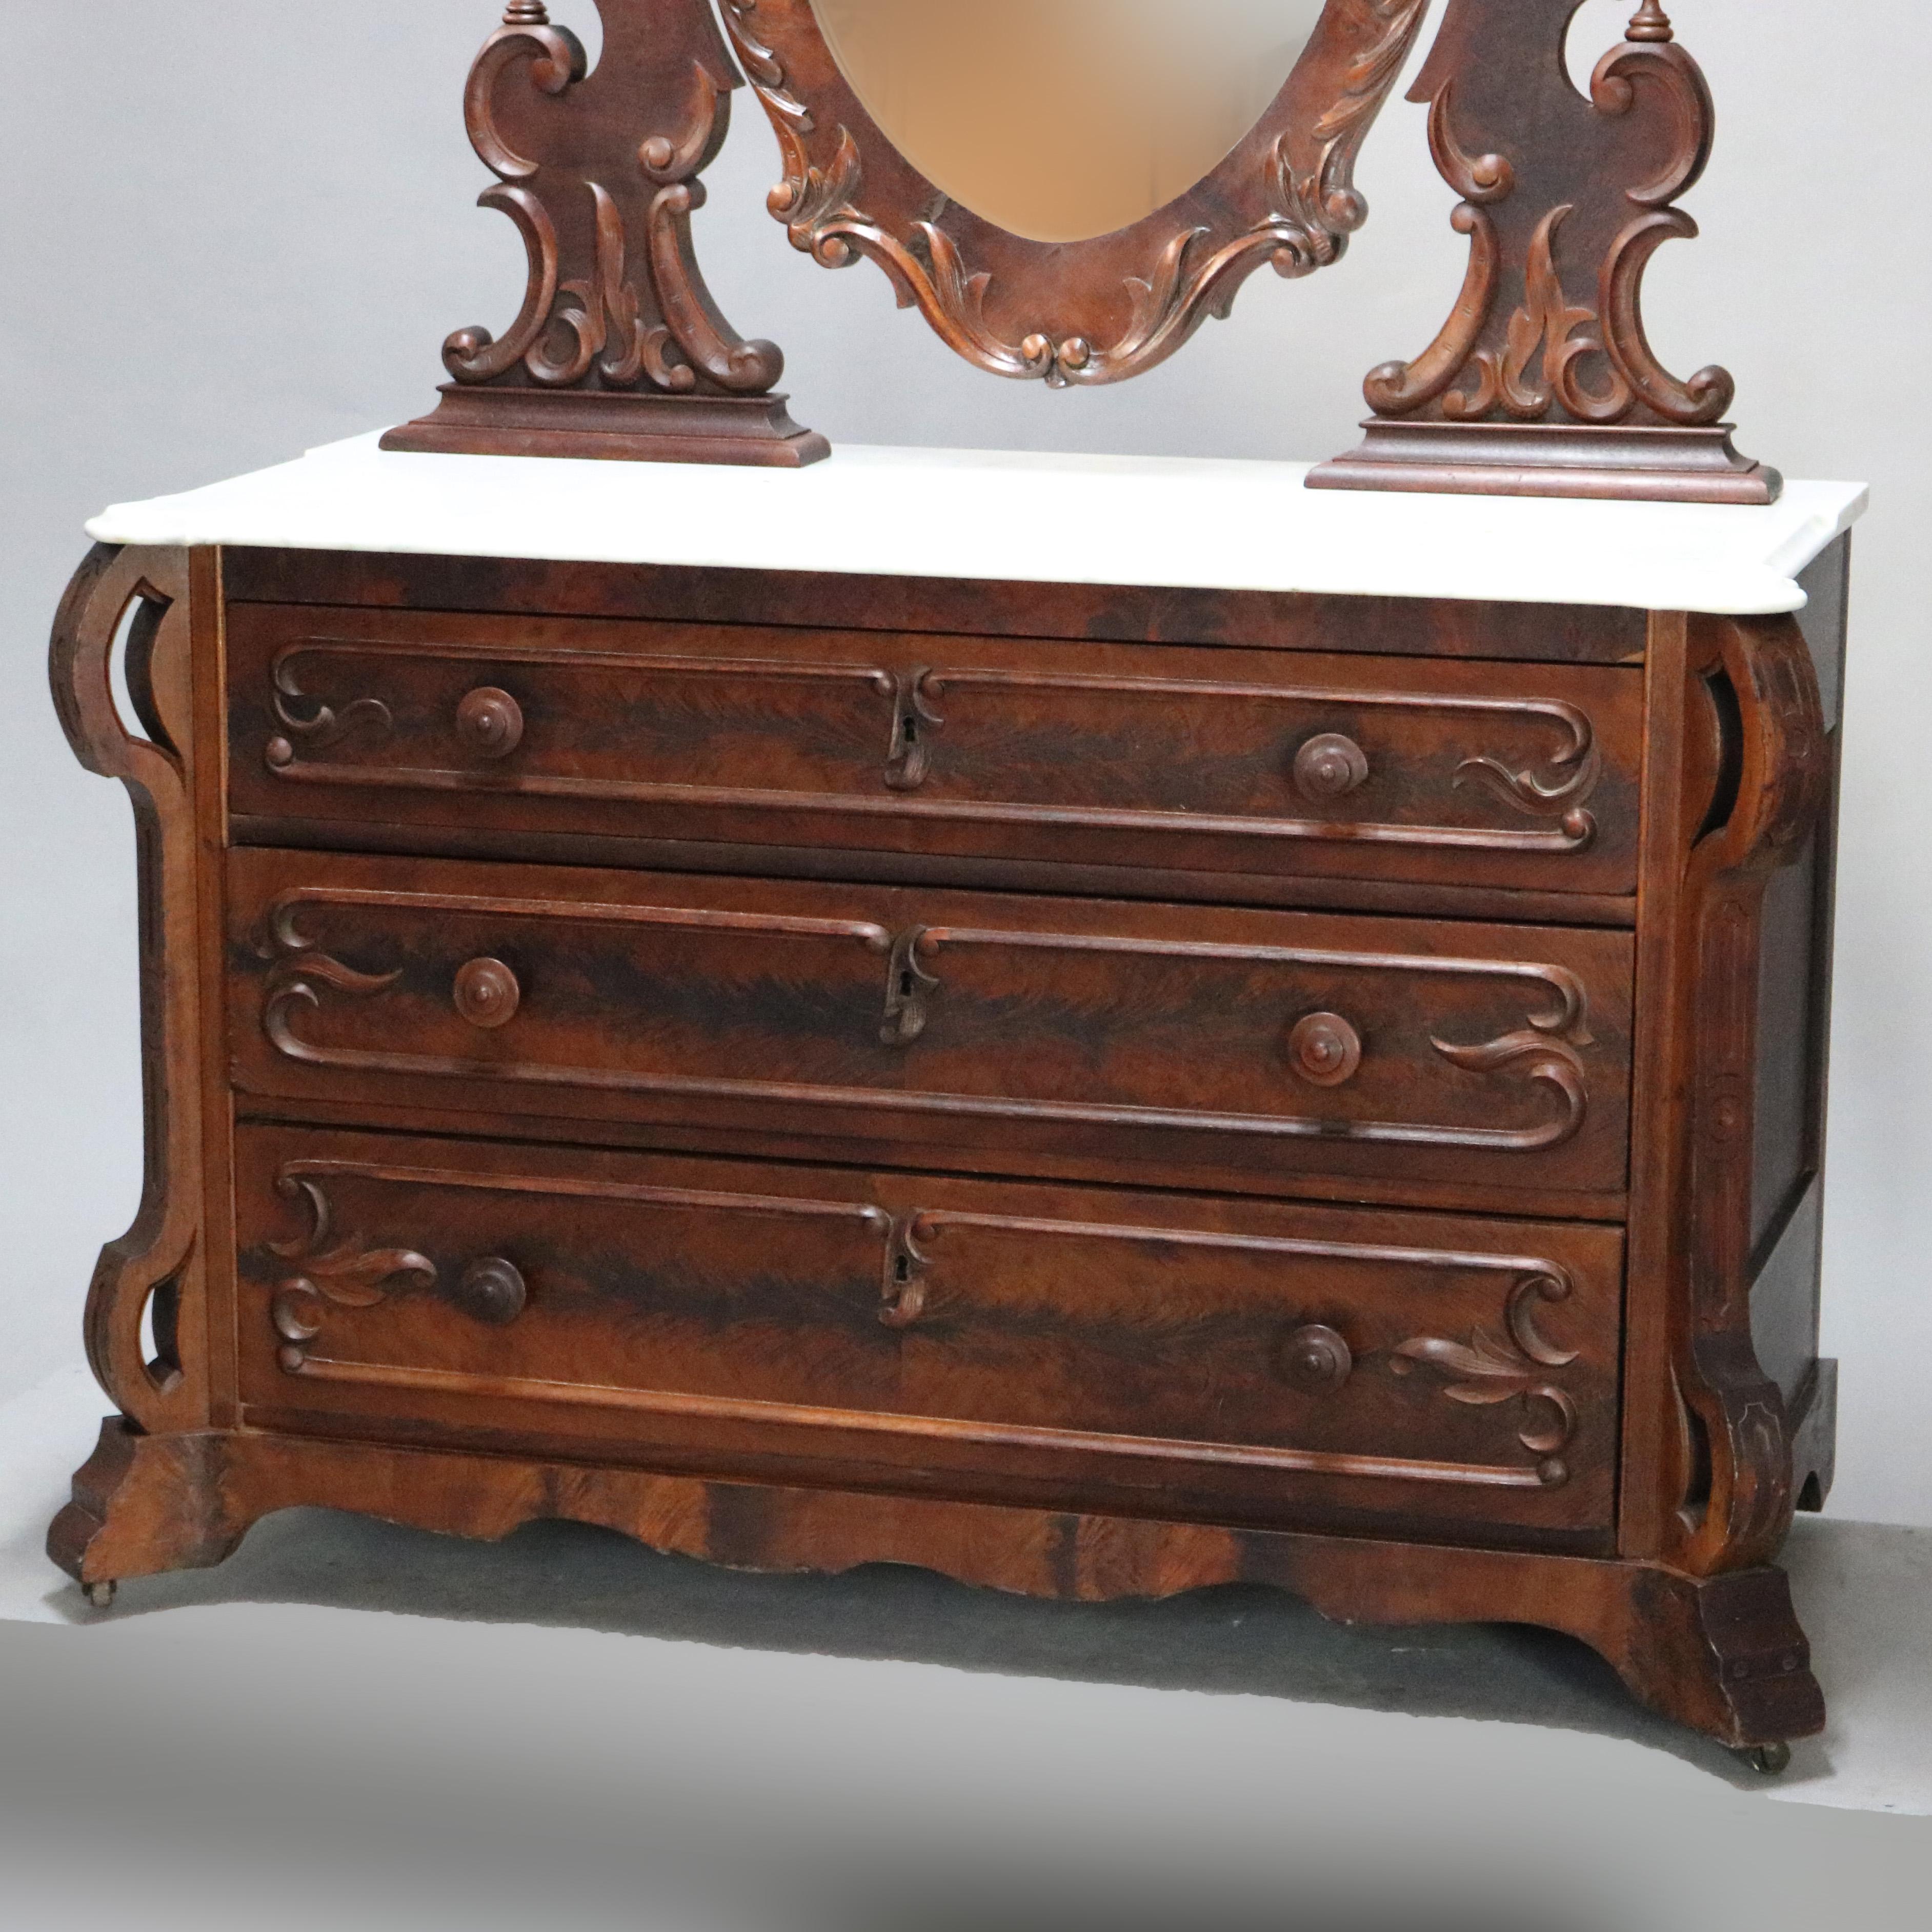 Antique Renaissance Revival Flame Mahogany and Marble Dresser, circa 1880 For Sale 6